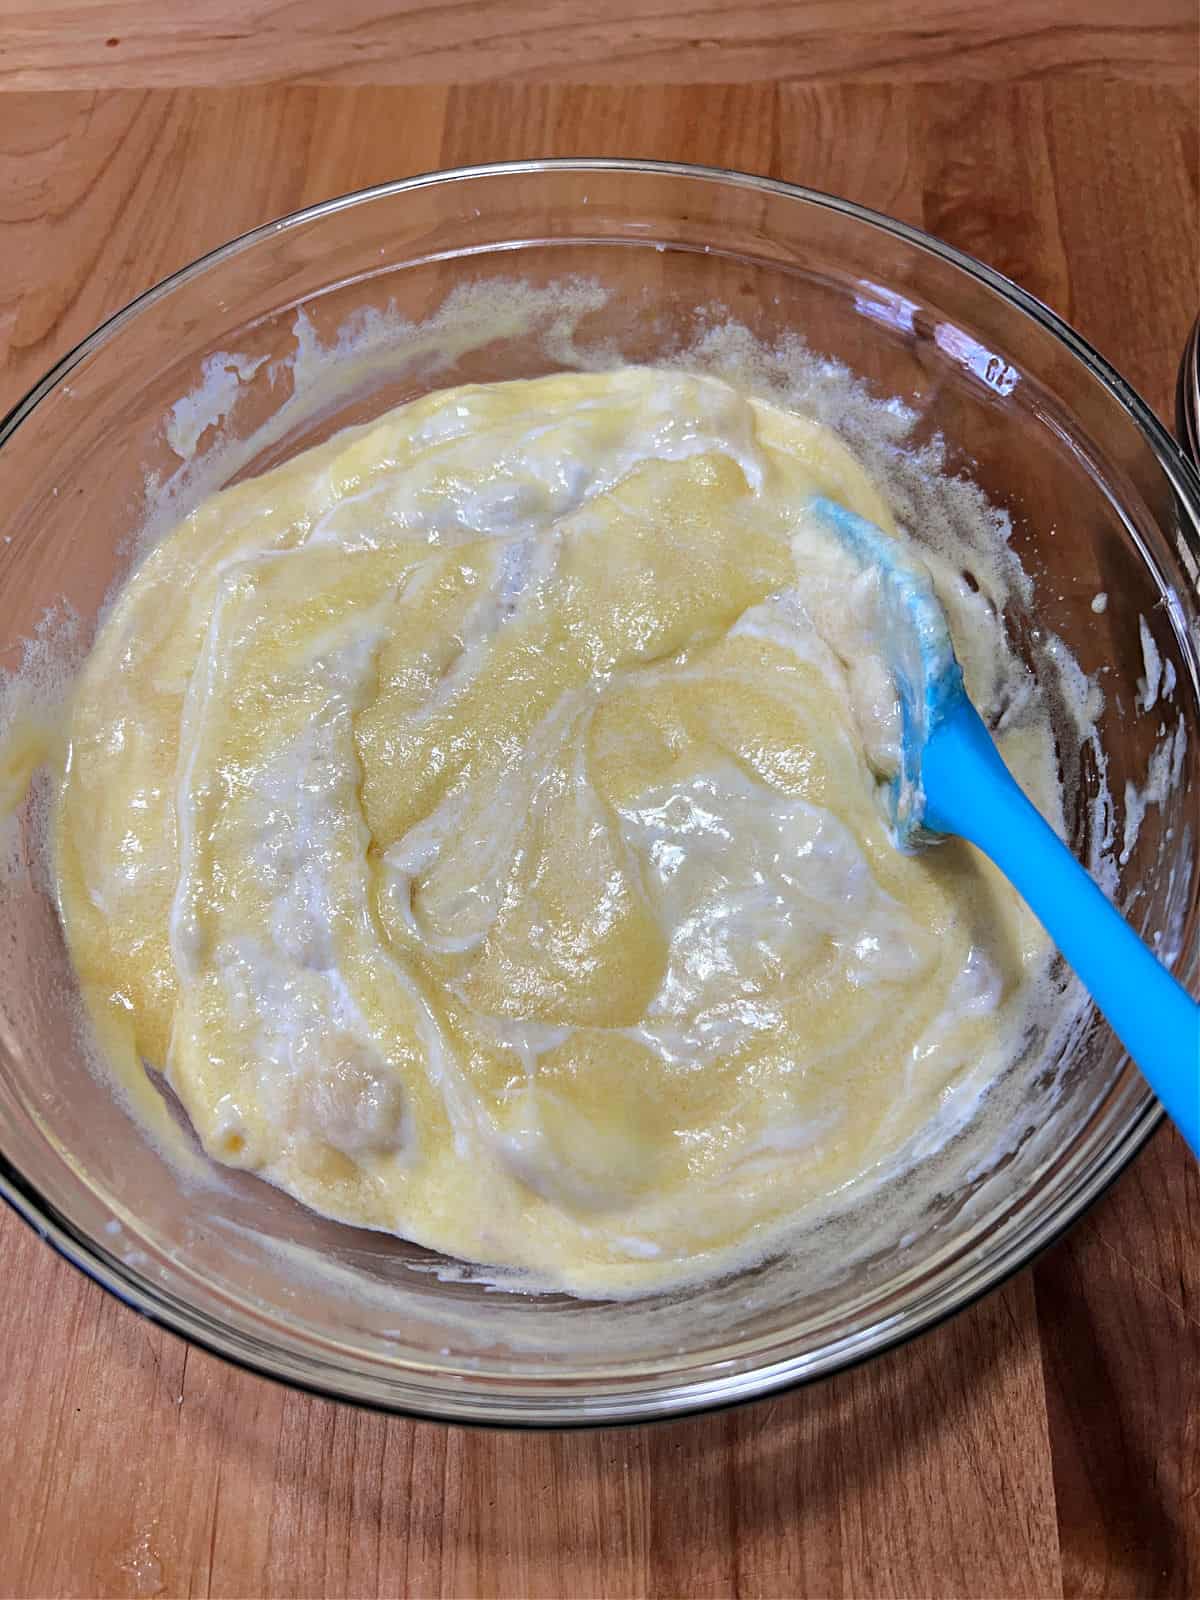 sour cream and banana mixture being added to the bowl.